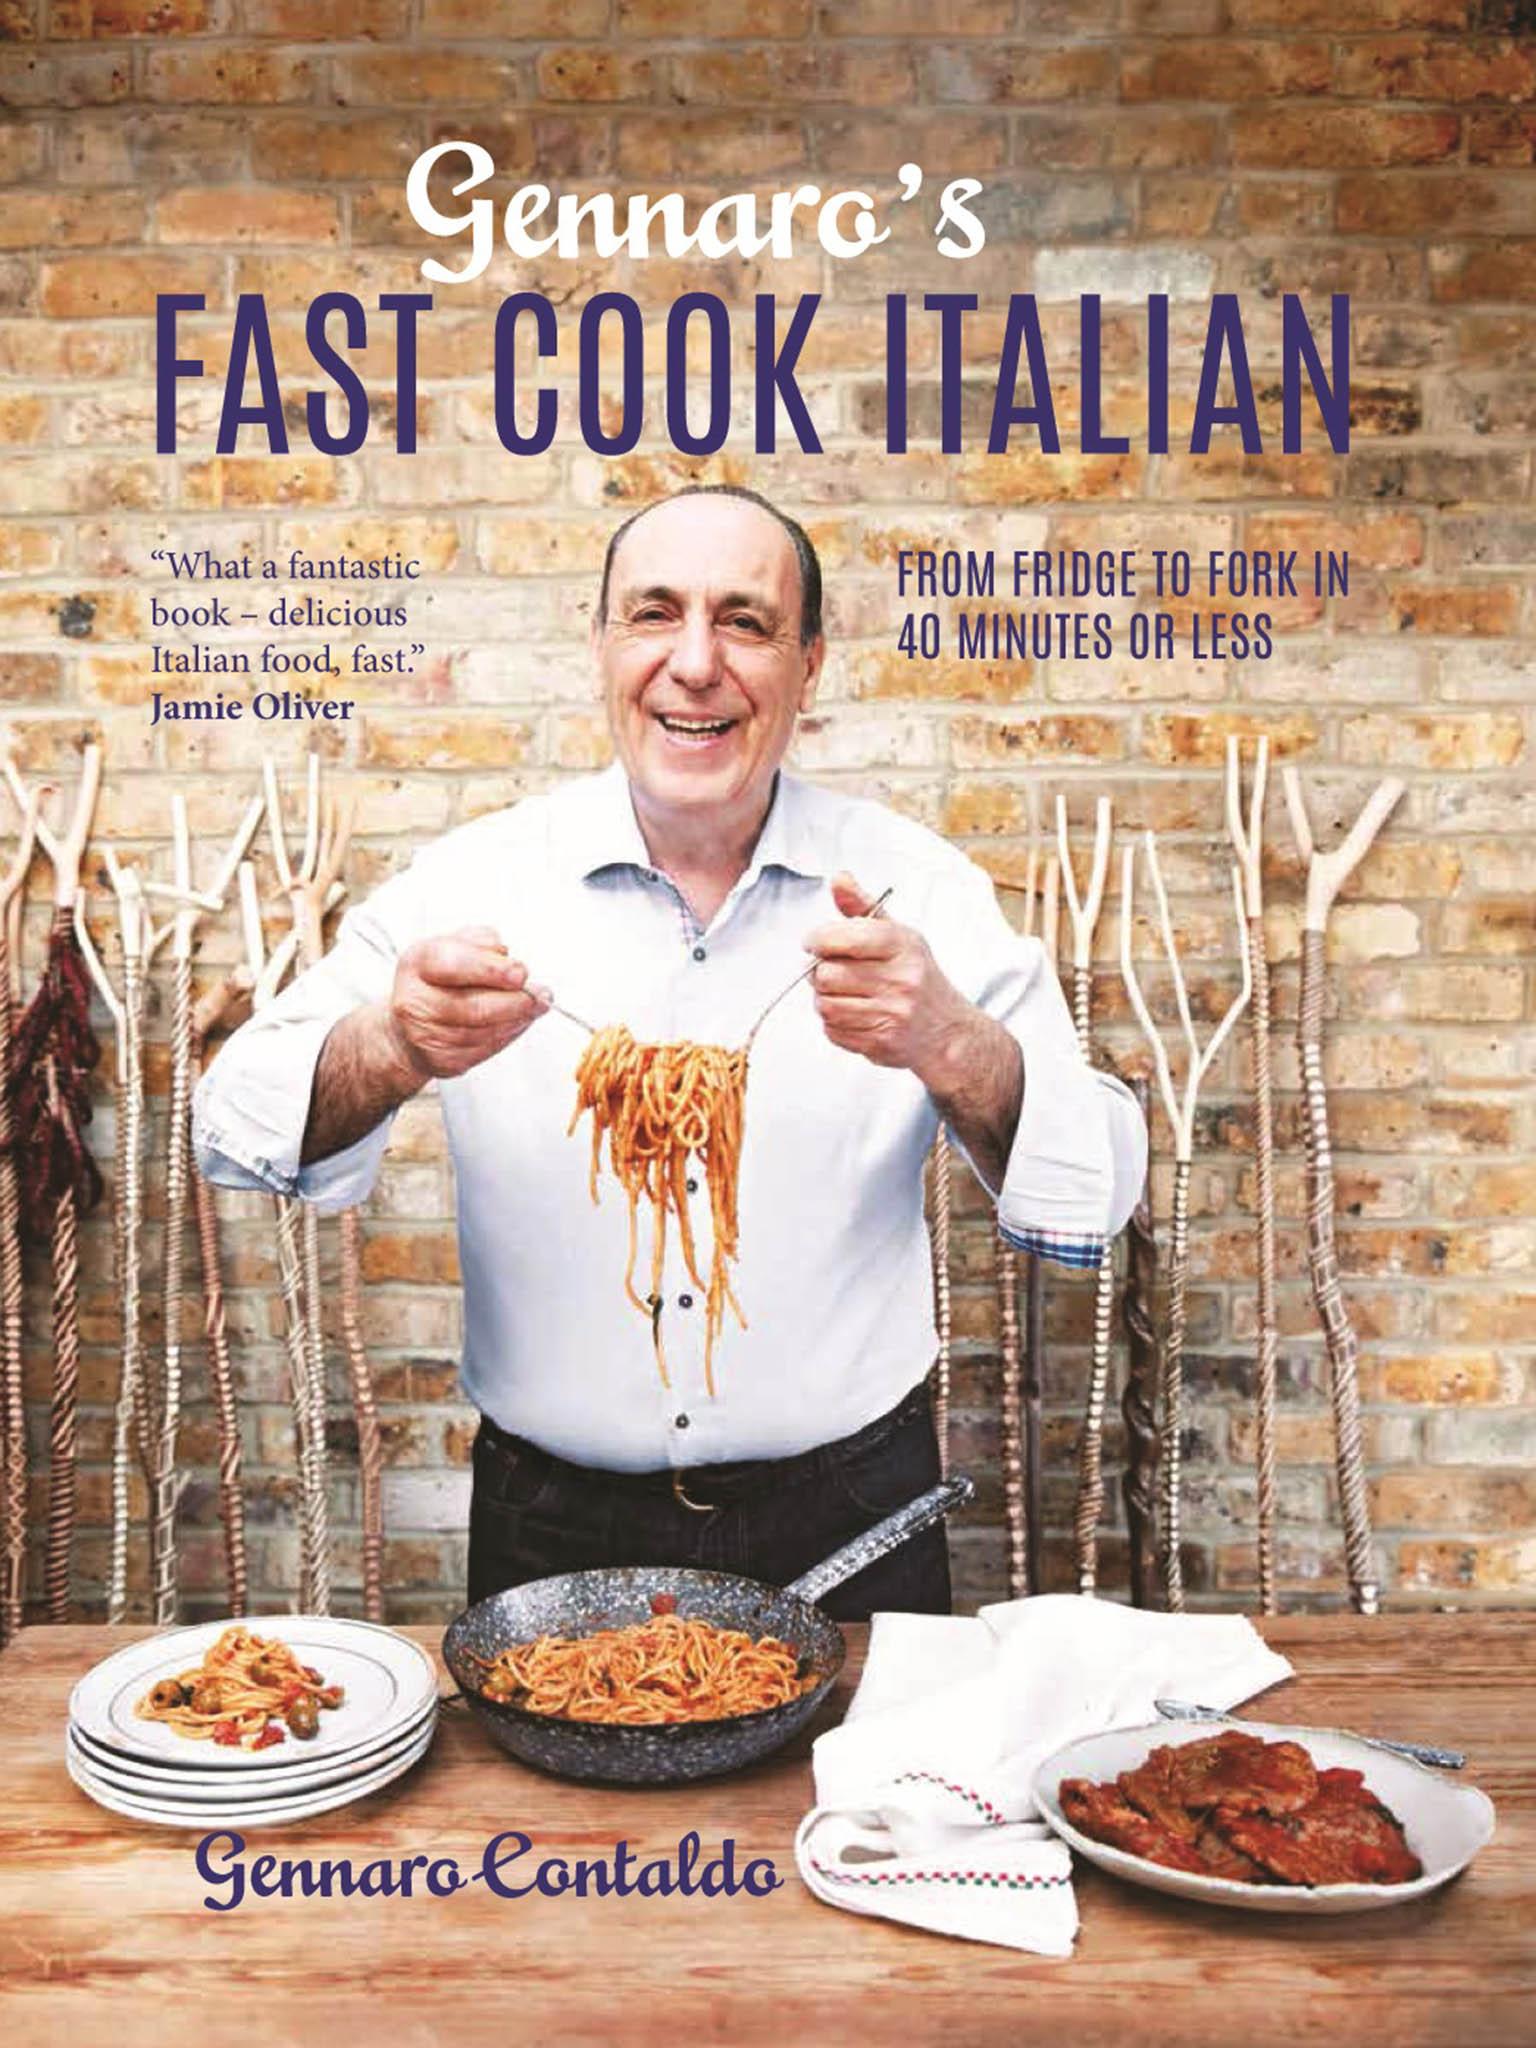 Gennaro Contaldo’s Fast Cook Italian, published by Pavilion Books. Image credit to Kim Lightbody.